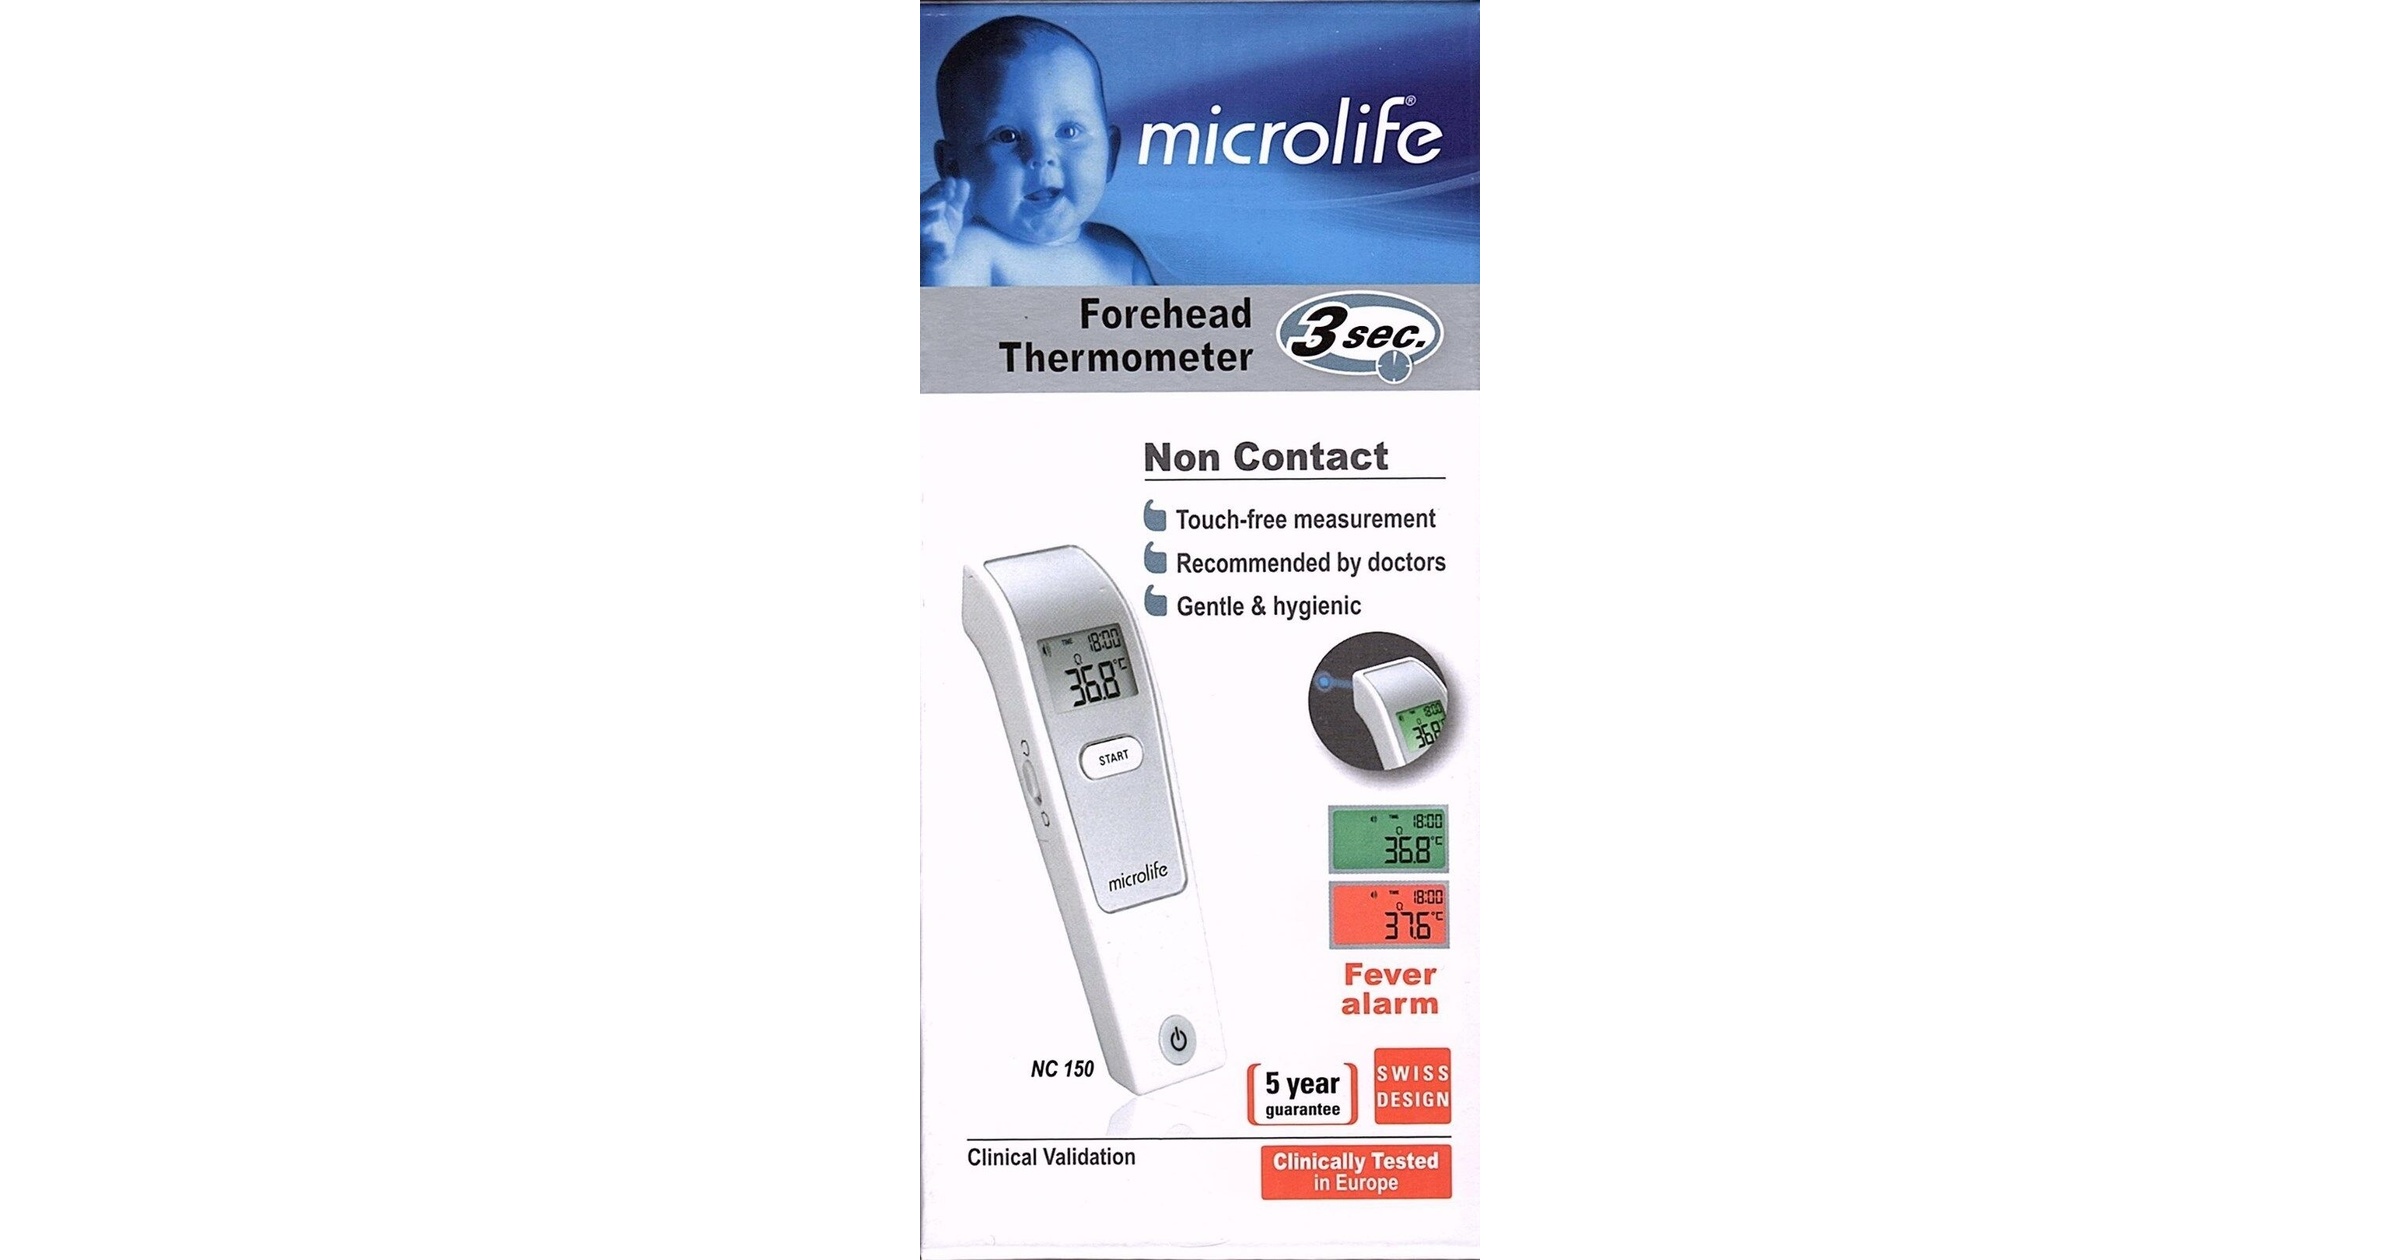 https://chemist2customer.com/images/pictures/microlife/microlife-thermometer-1-(1200x630-ffffff).jpg?v=ababa47b